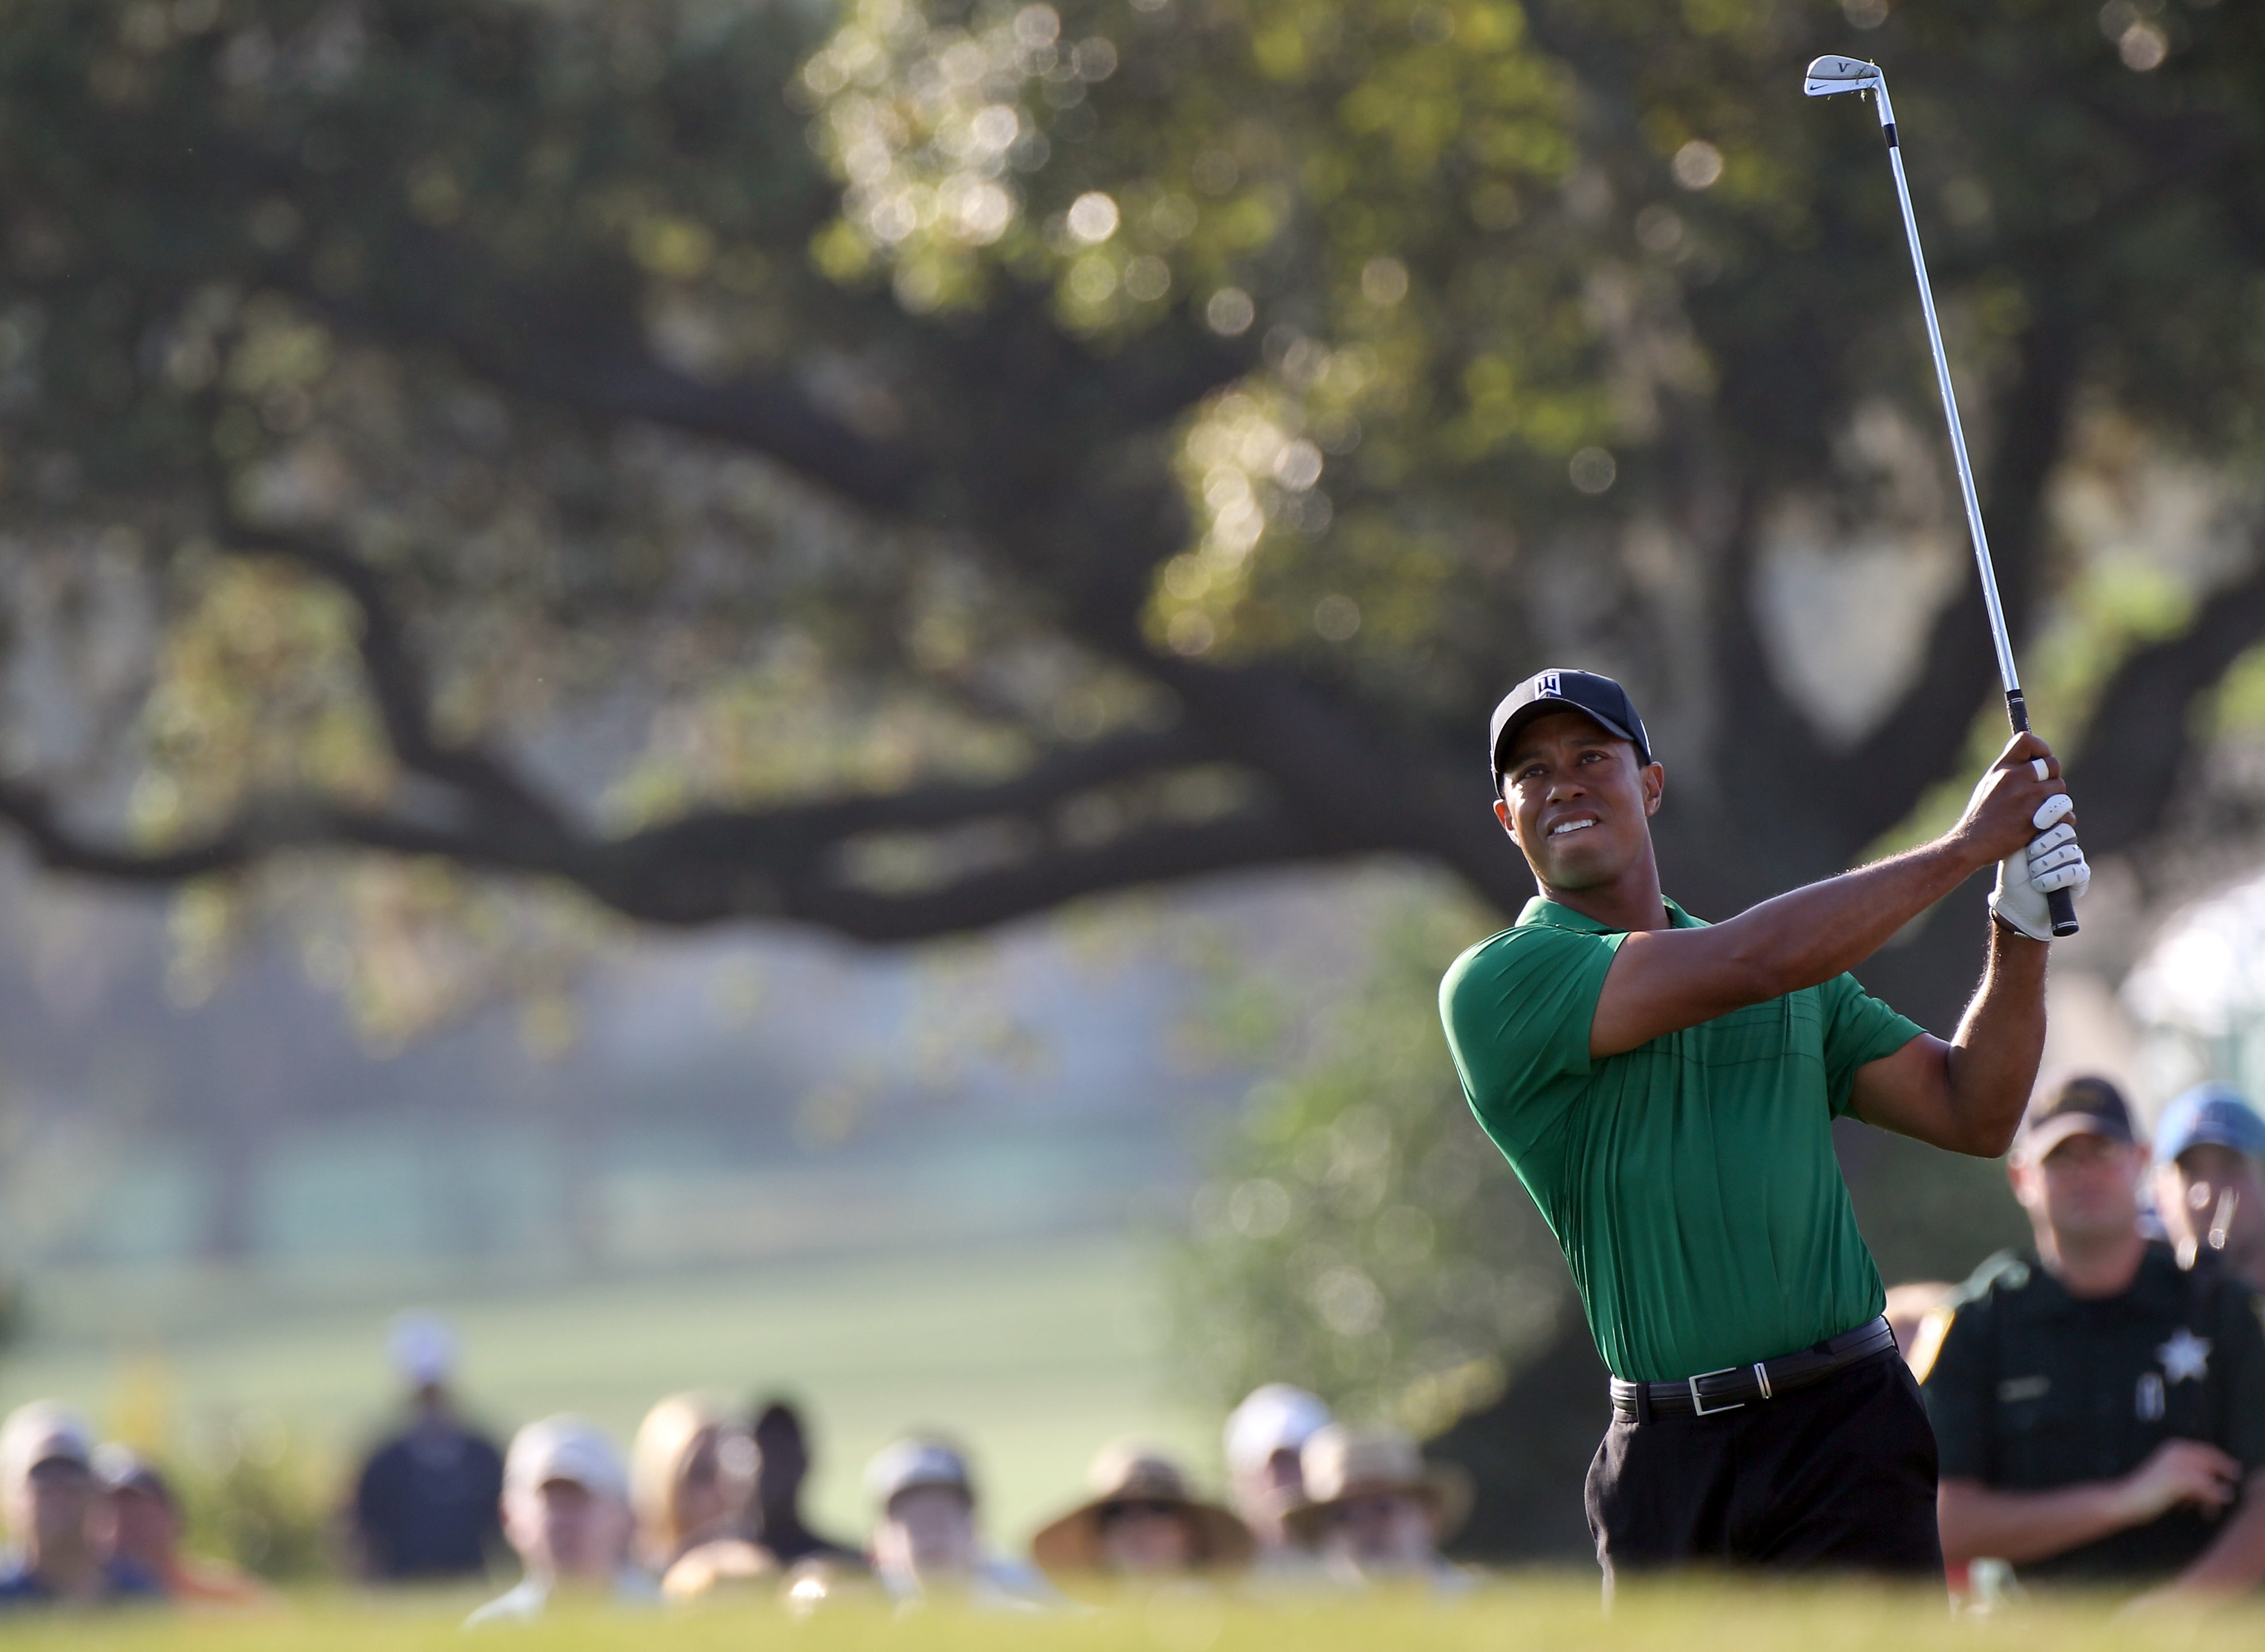 ORLANDO, FL - MARCH 25:  Tiger Woods plays a shot on the 13th hole during the second round of the Bay Hill Invitational presented by MasterCard at the Bay Hill Club and Lodge on March 25, 2011 in Orlando, Florida.  (Photo by Sam Greenwood/Getty Images)